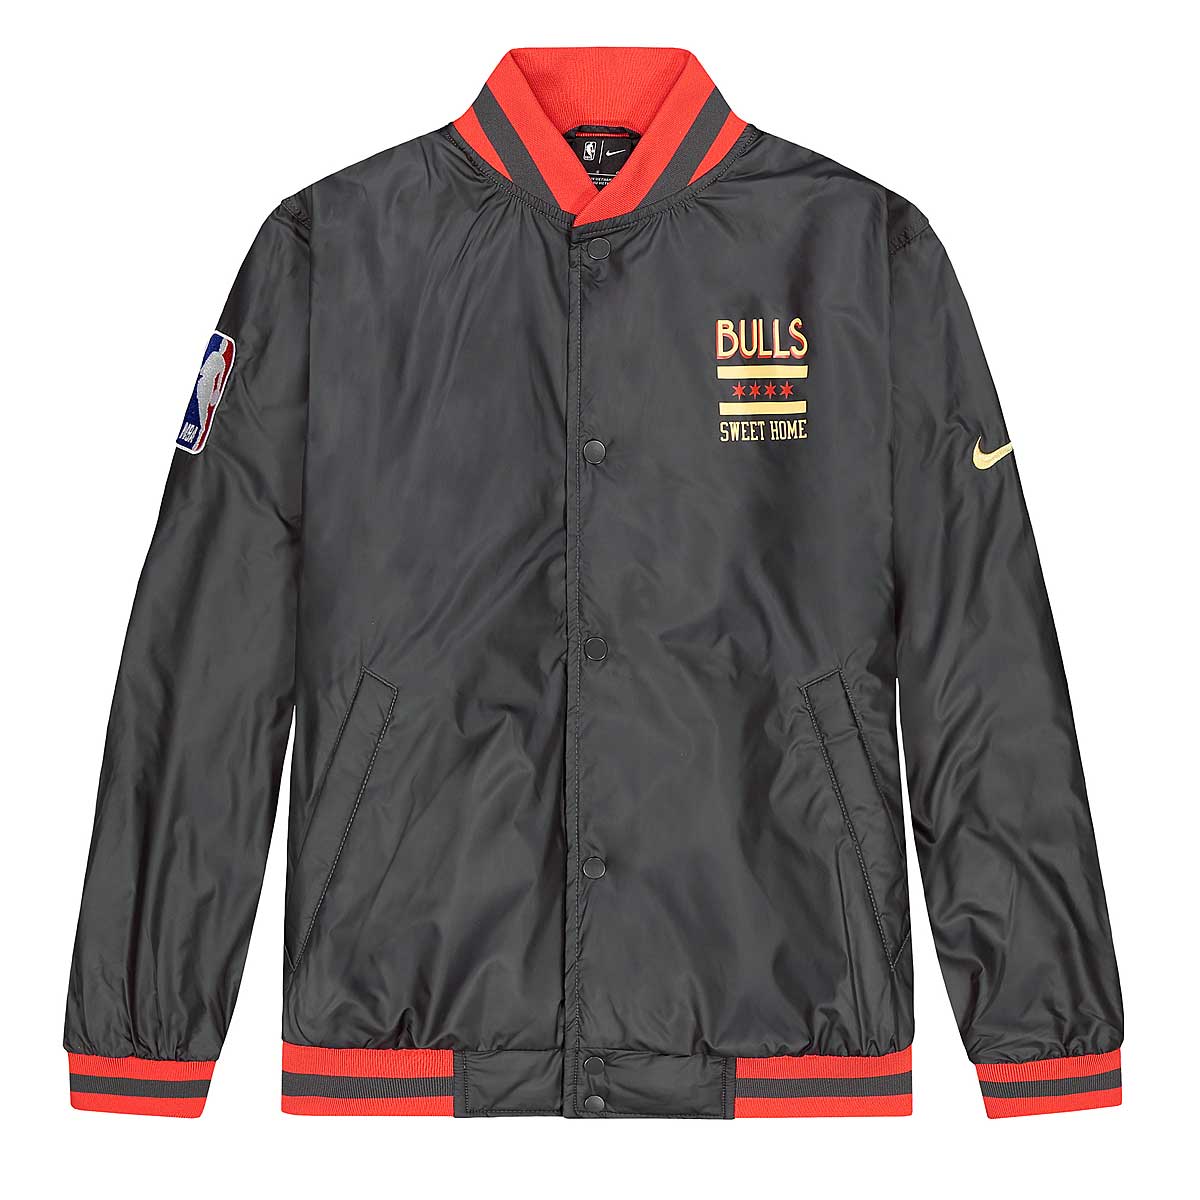 Nike Chicago Bulls City Edition Courtside NBA Jacket Grey -  ANTHRACITE/ANTHRACITE